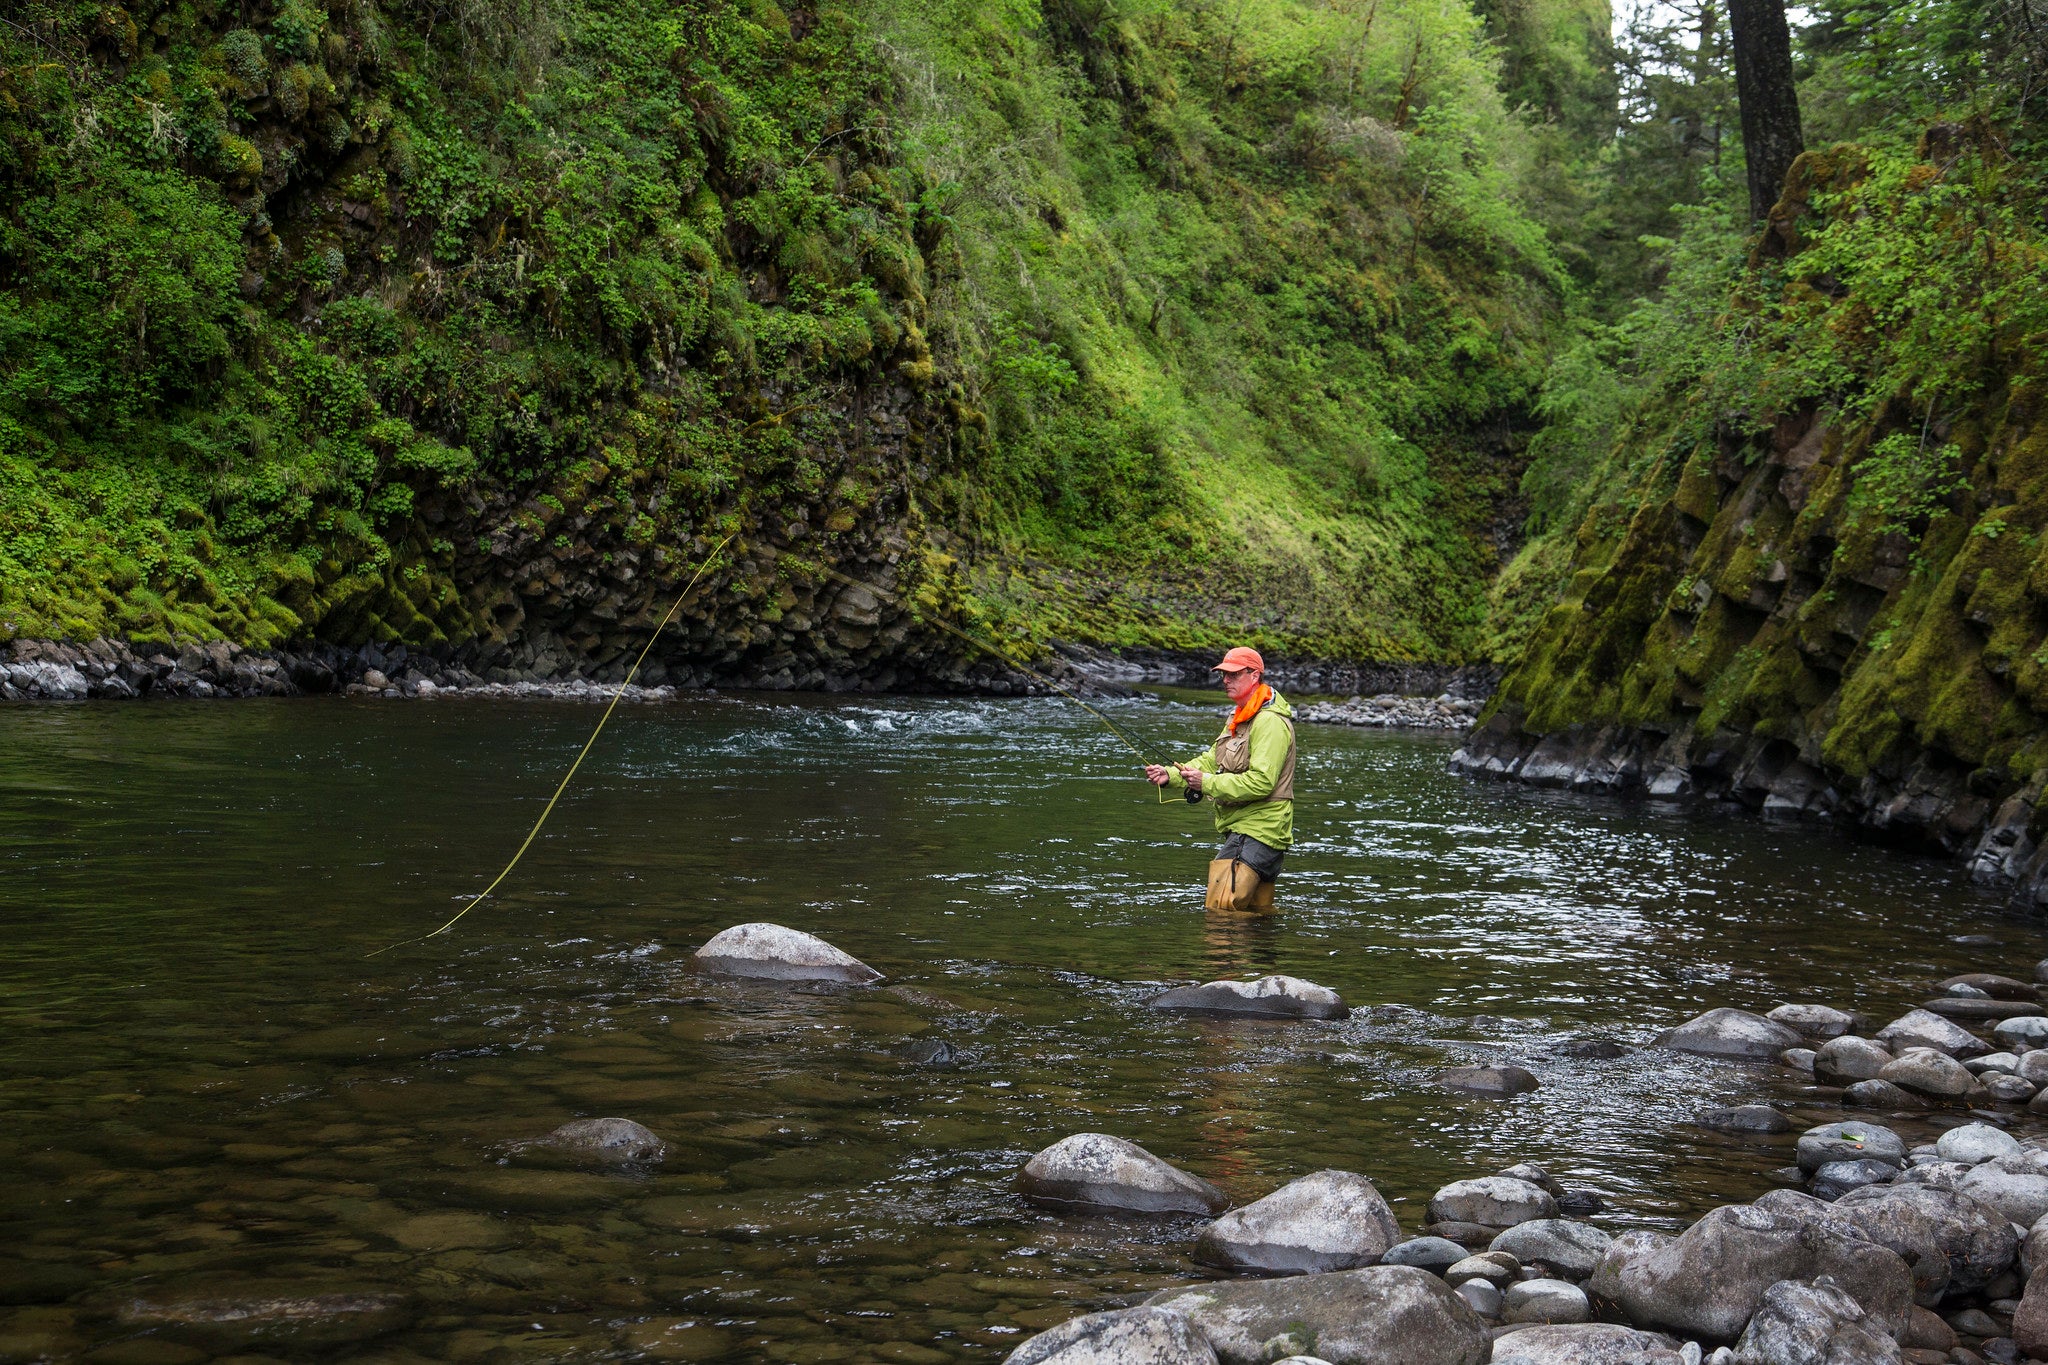 A man in a greenshirt and waders fly fishes in a shady river.